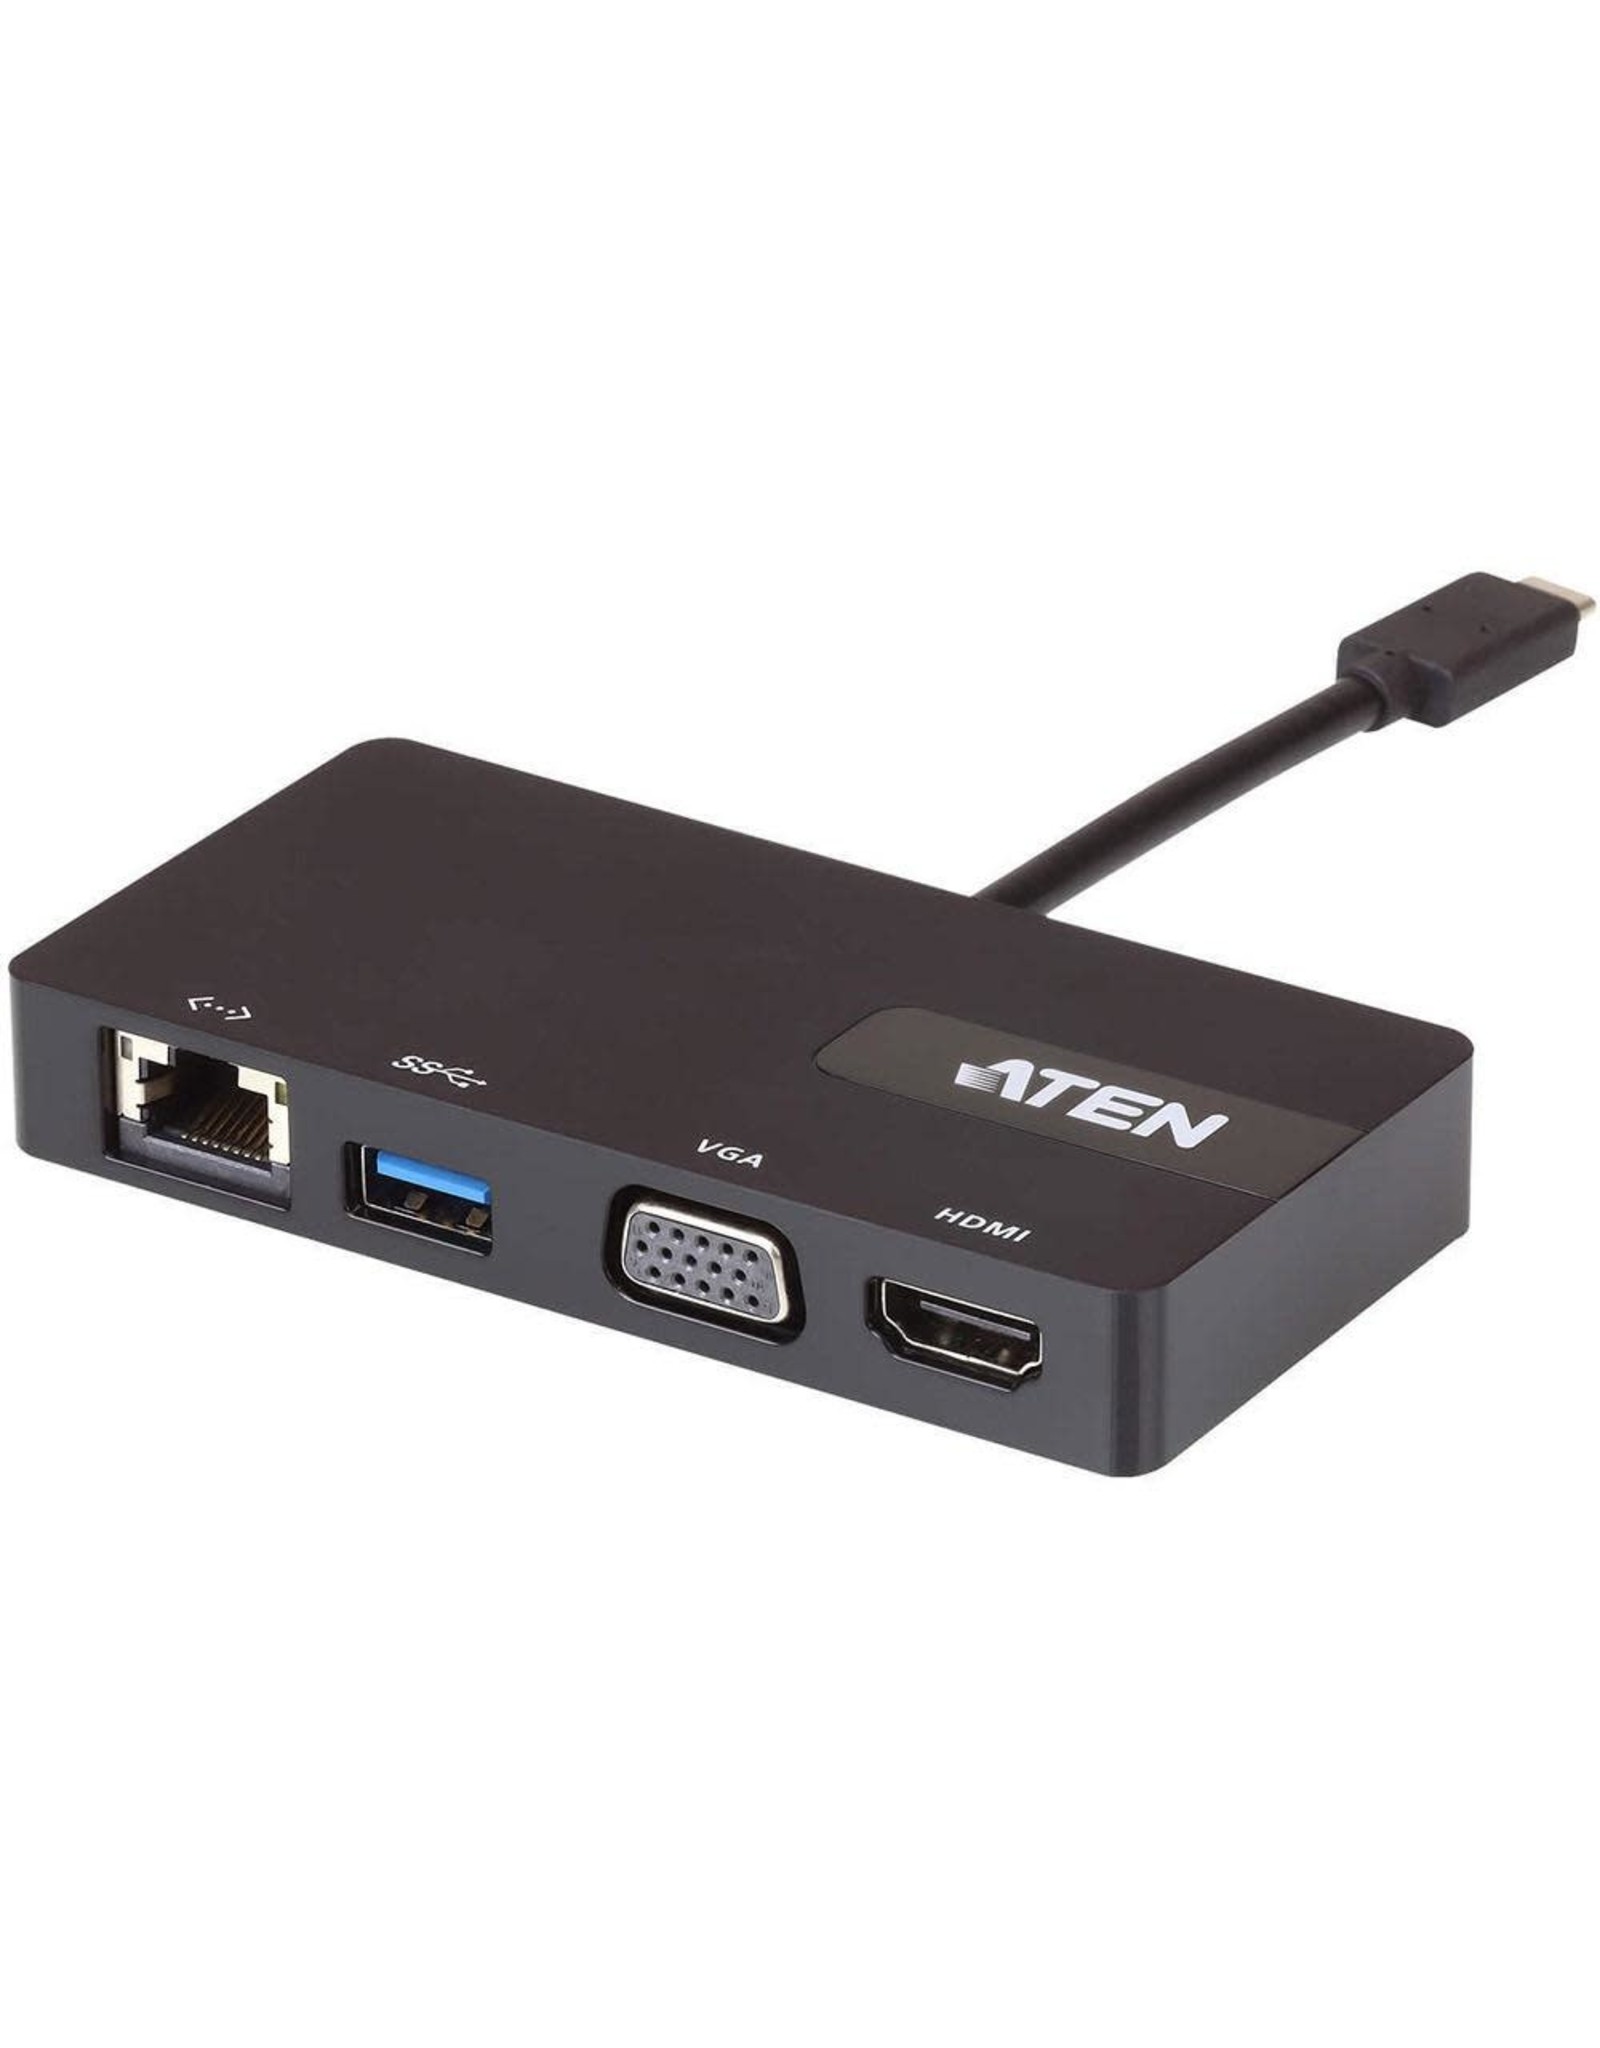 Aten ATEN USB-C Single-View Multiport Mini Dock connects a USB-C or Thunderbolt™ 3 computer to an HDMI/VGA Single View:3840*2160@30, Ethernet and USB Type-A 3.1 port via single cable